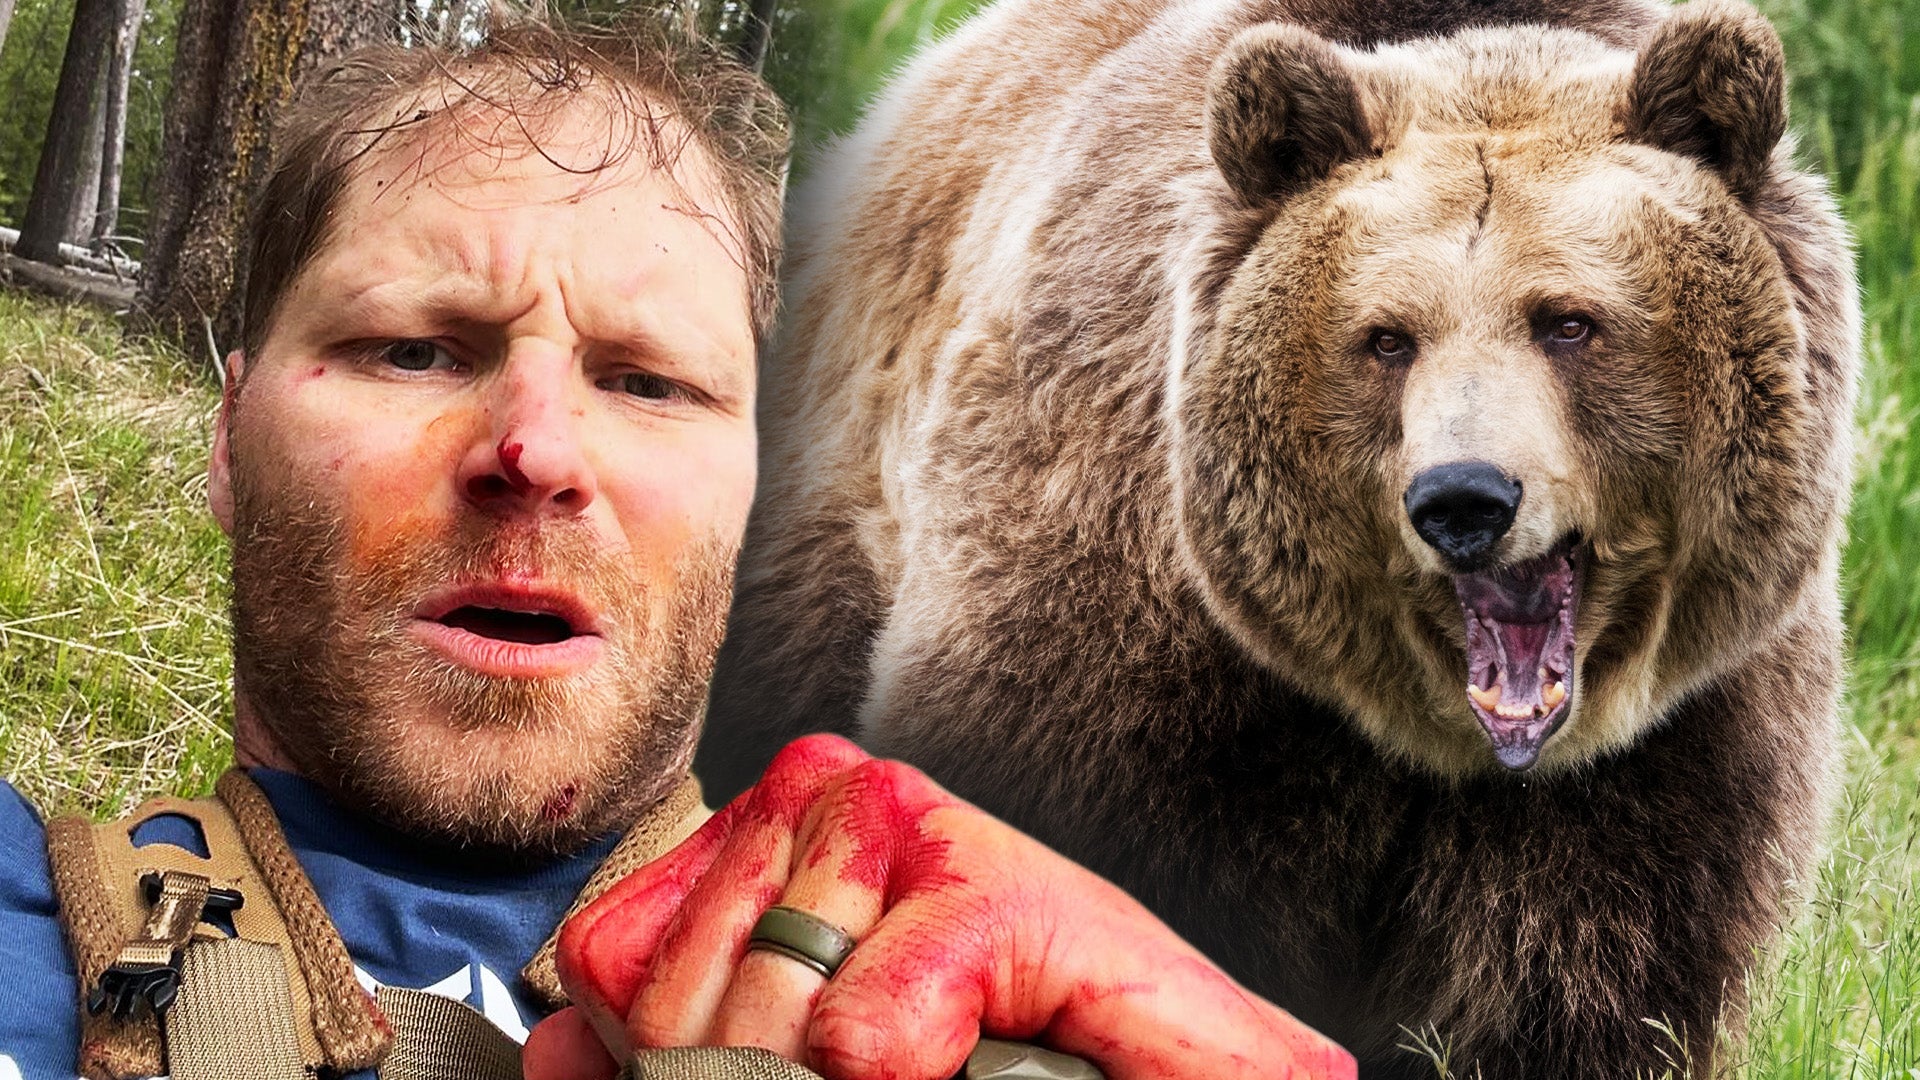 Man attacked by bear, grizzly bear